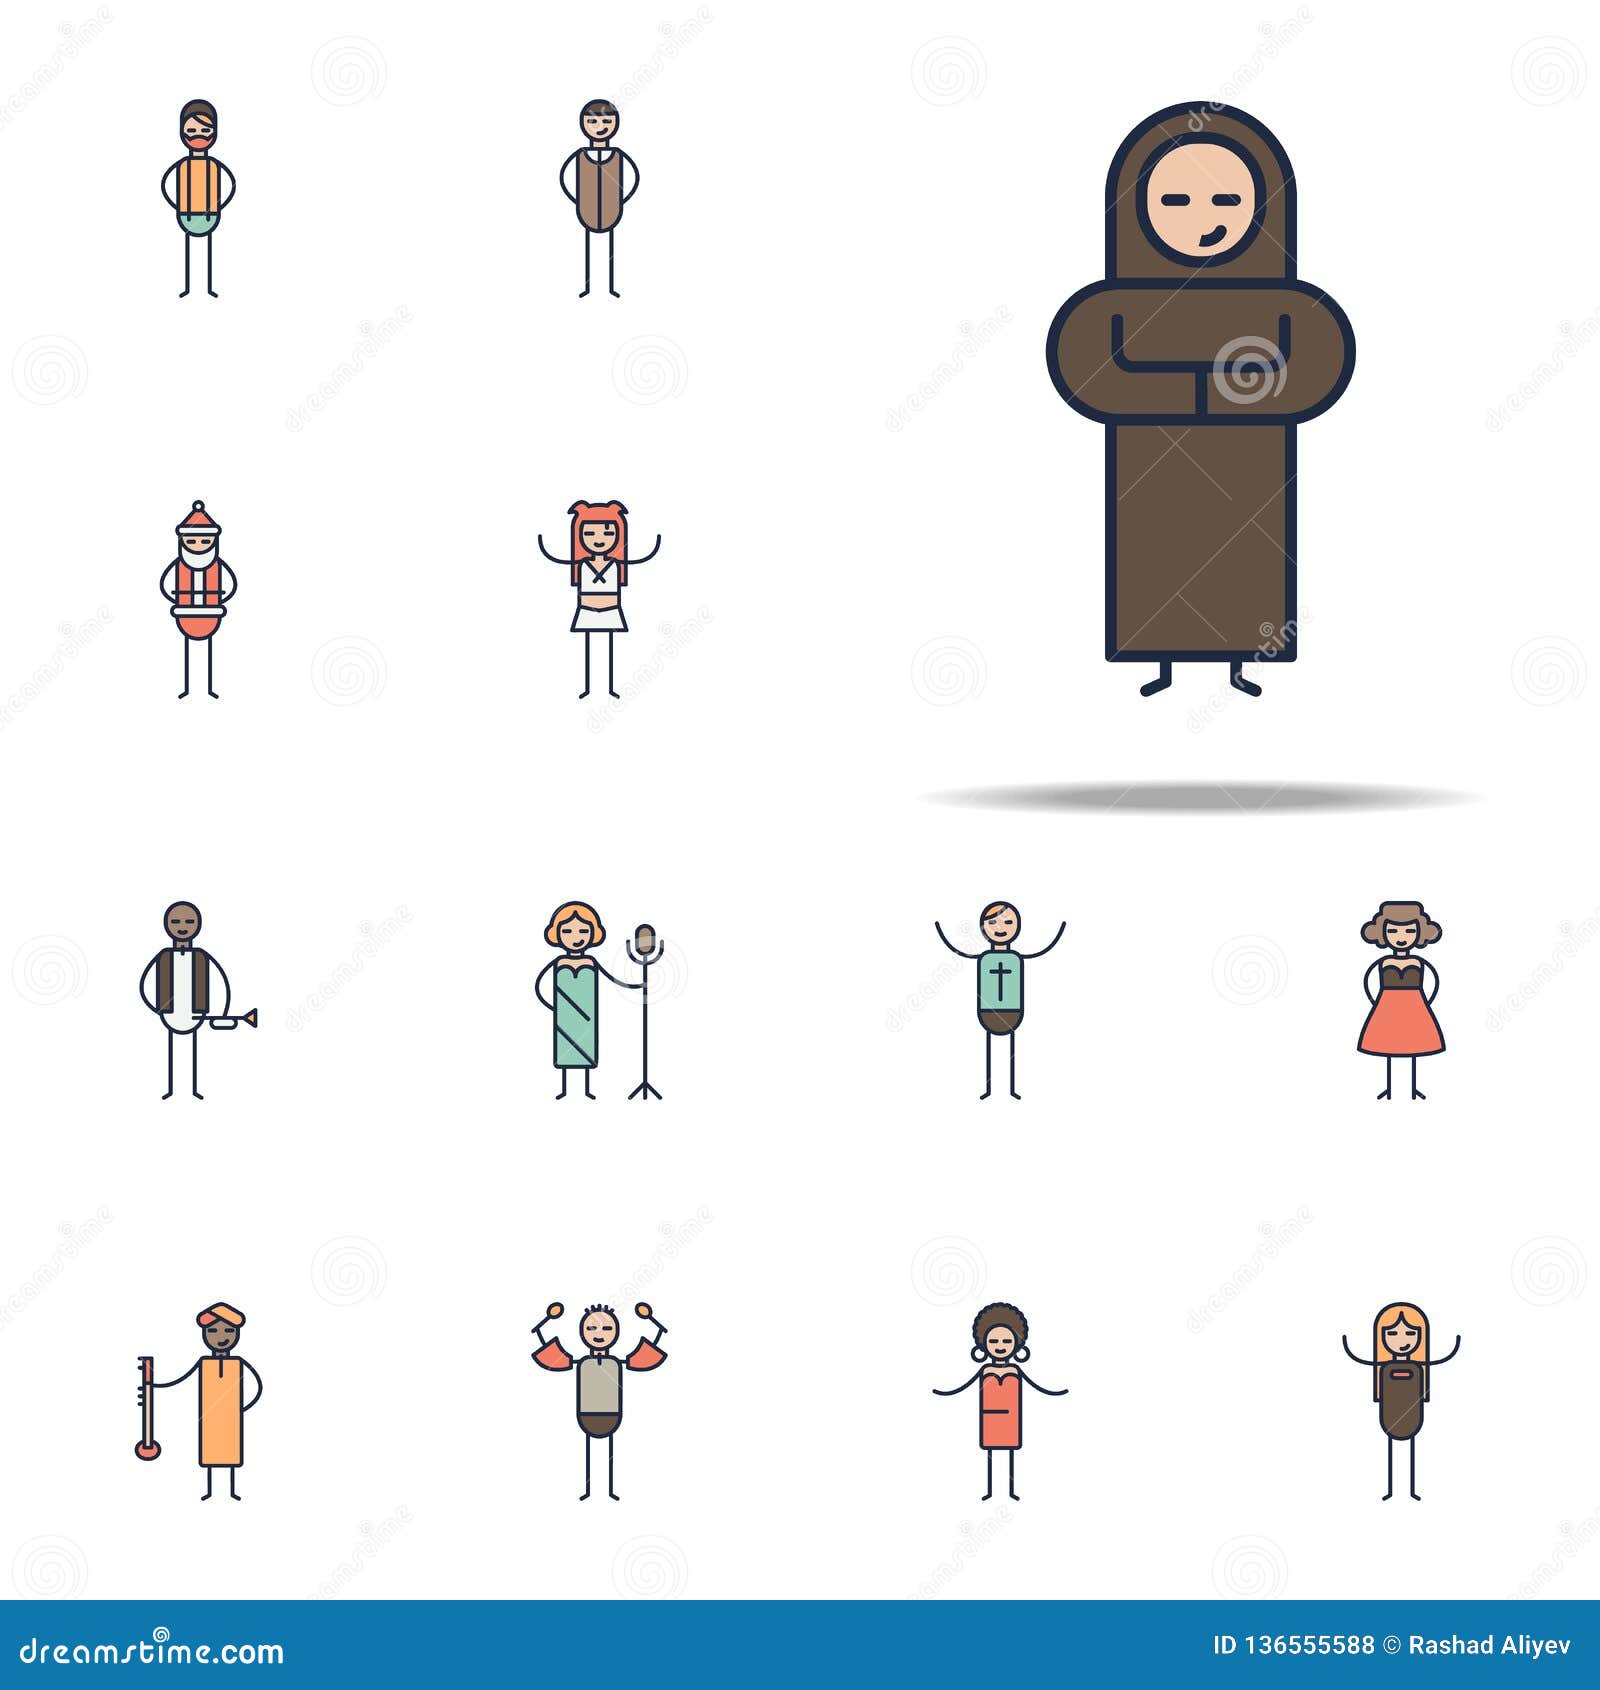 gregorian musician icon. linear musical genres icons universal set for web and mobile